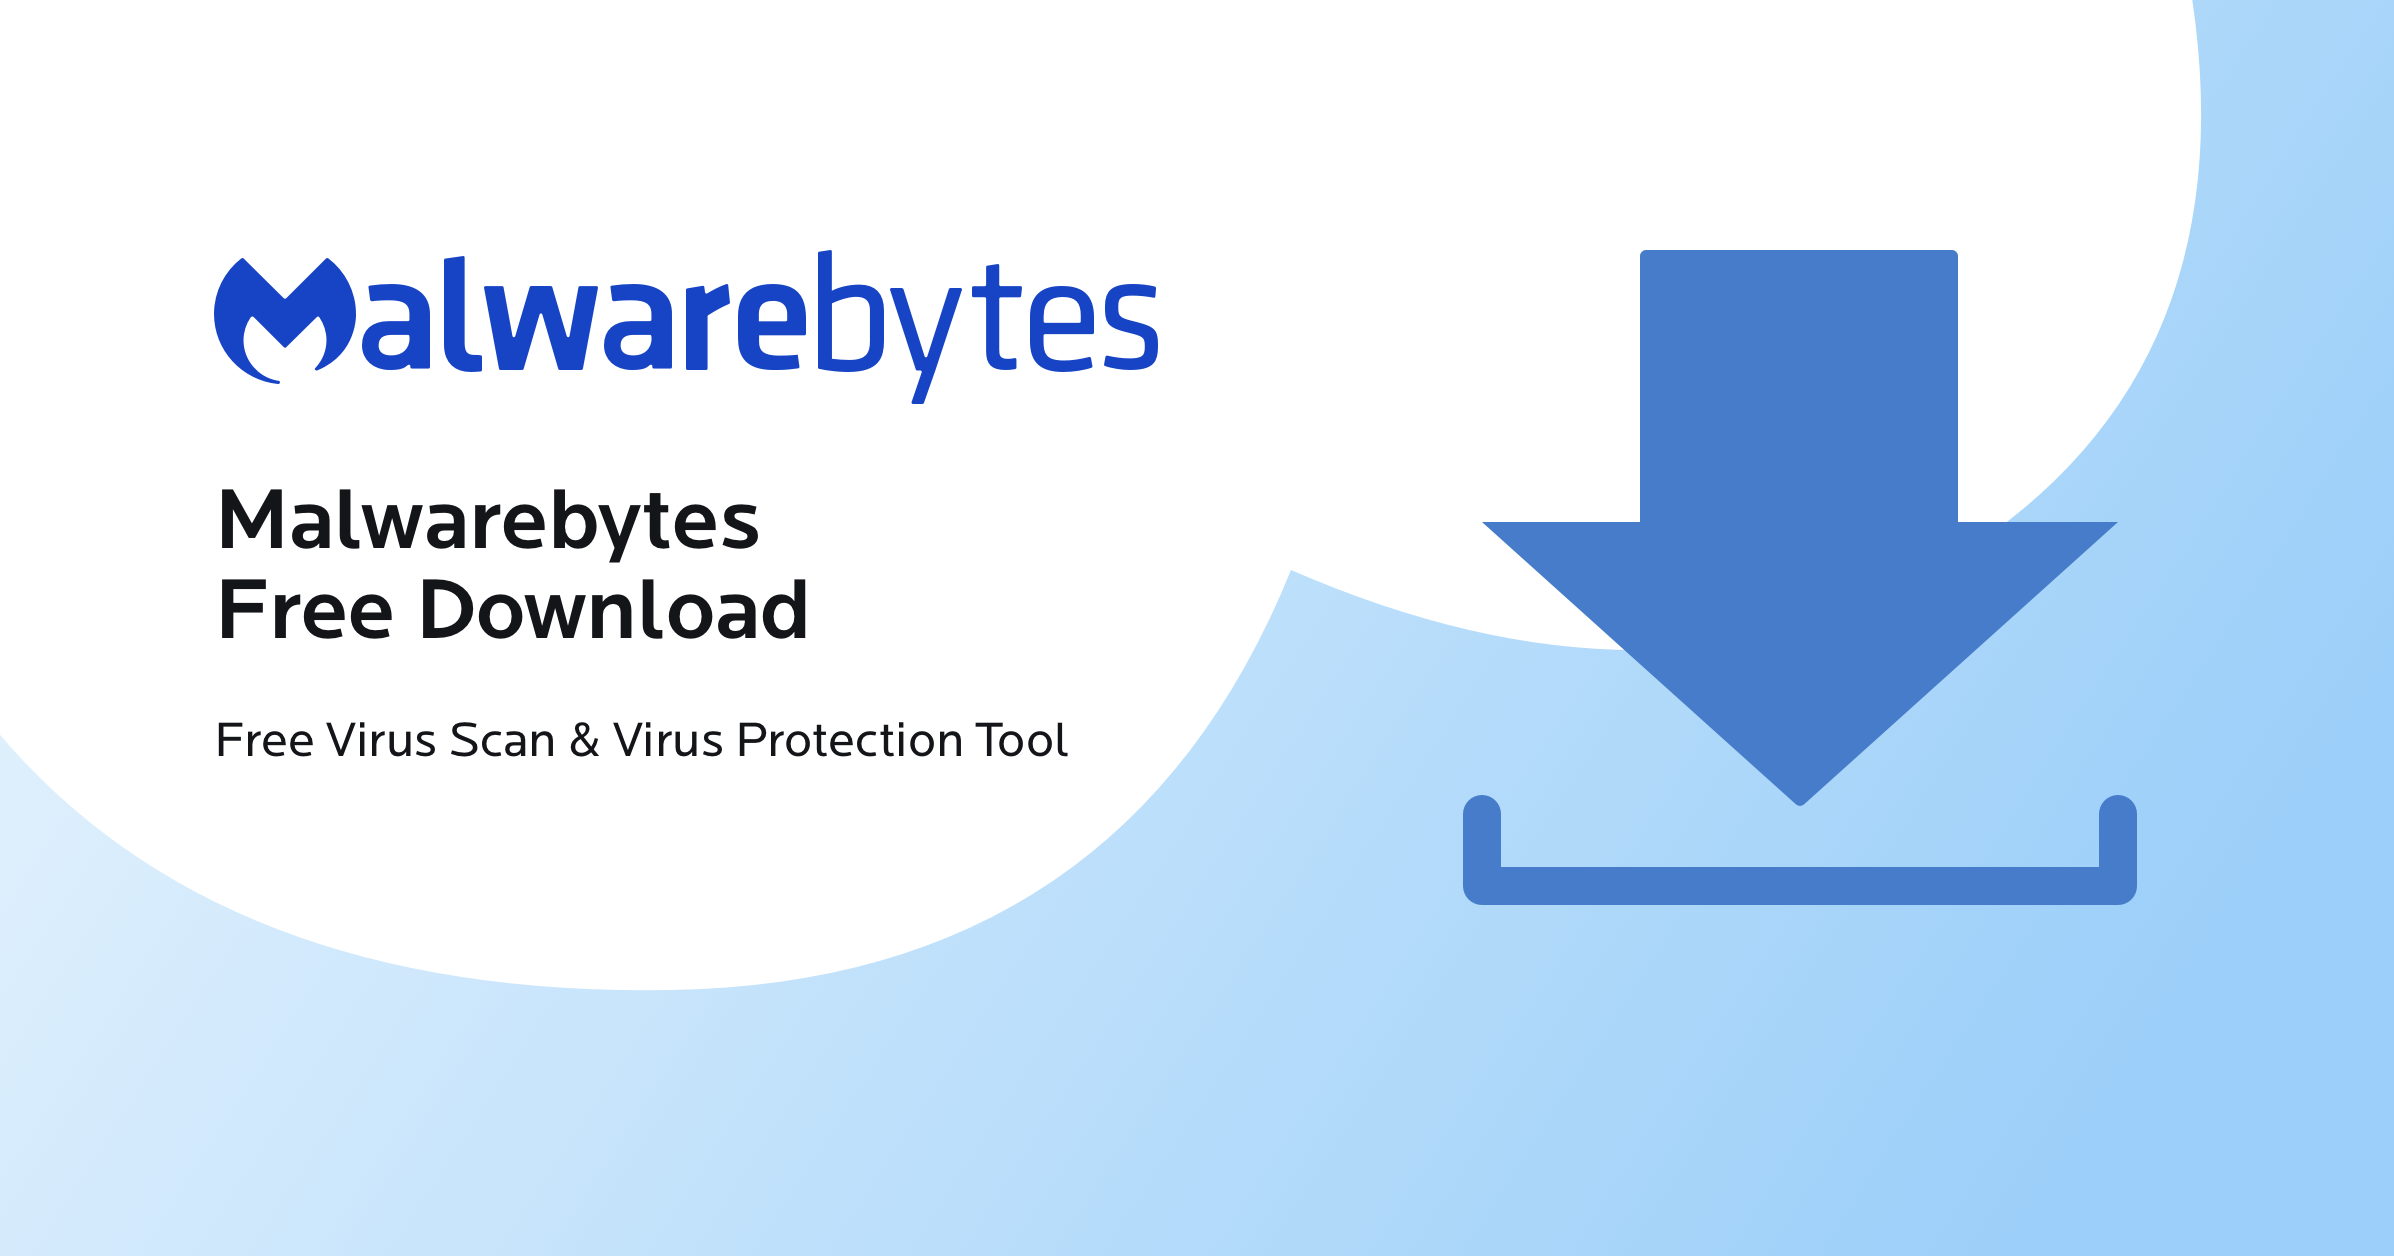 Download and install a reliable antivirus or antimalware program.
Open the antivirus program and run a full system scan.